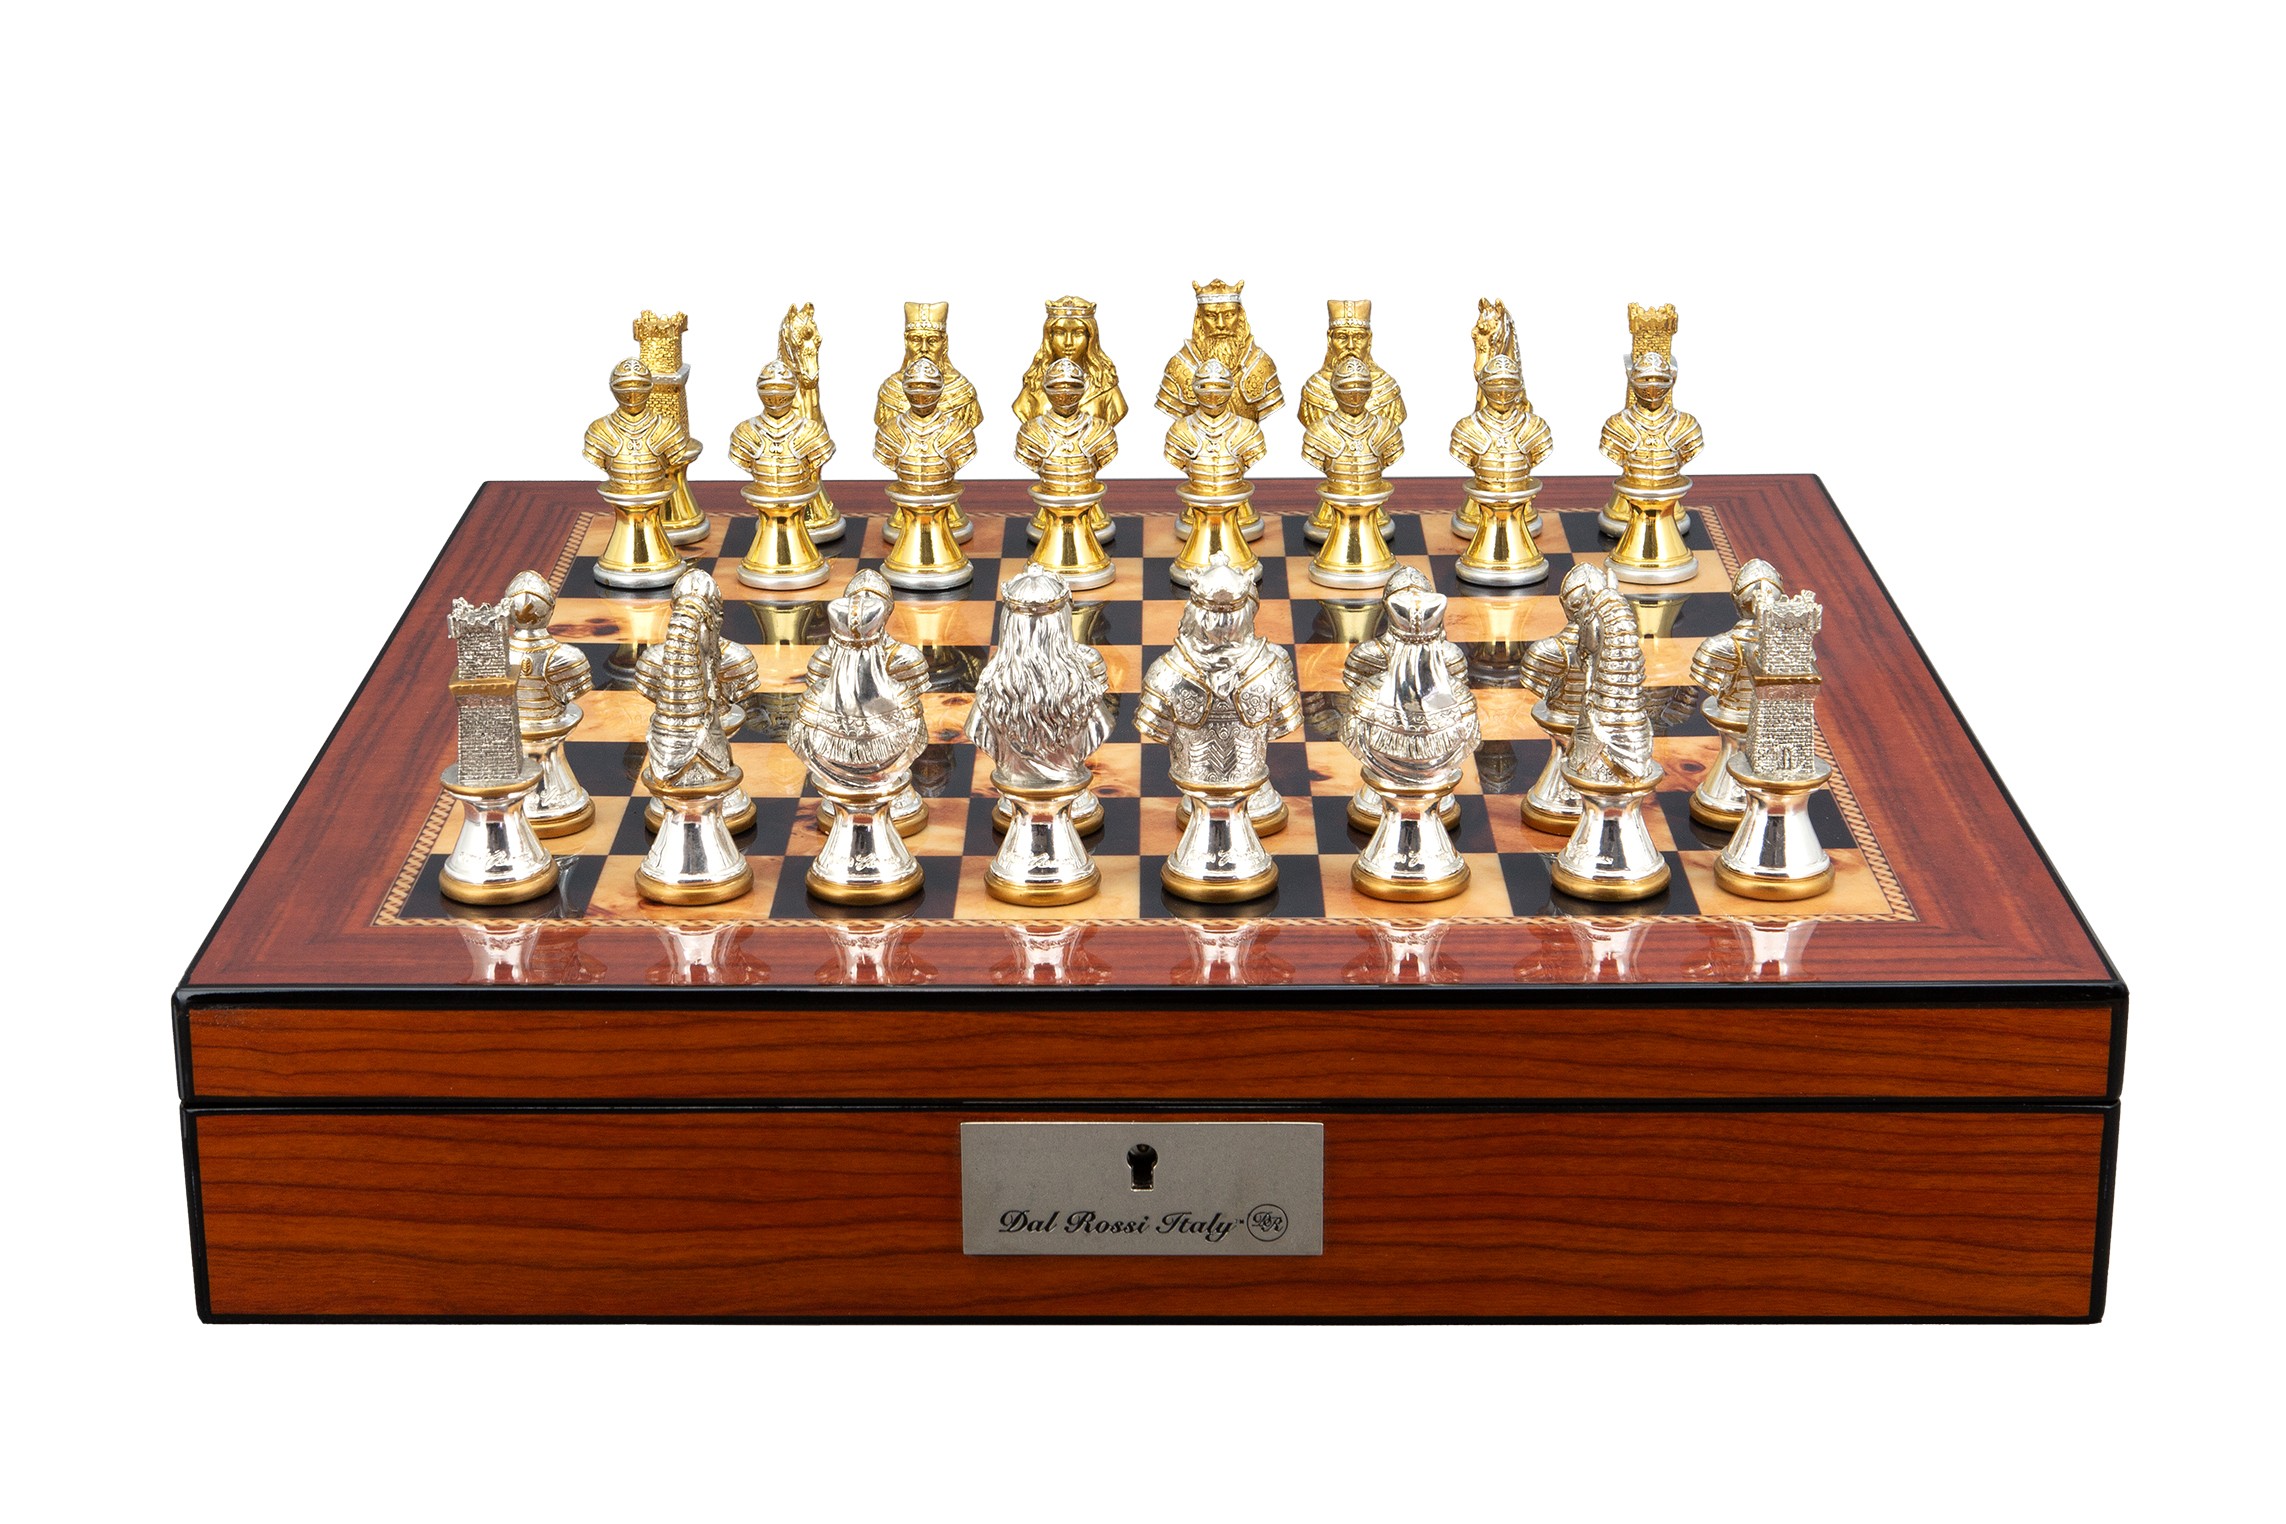 Dal Rossi Medieval Warriors Metal Chessmen 85mm on a Walnut Finish Shiny Chess Box with Compartments 16"